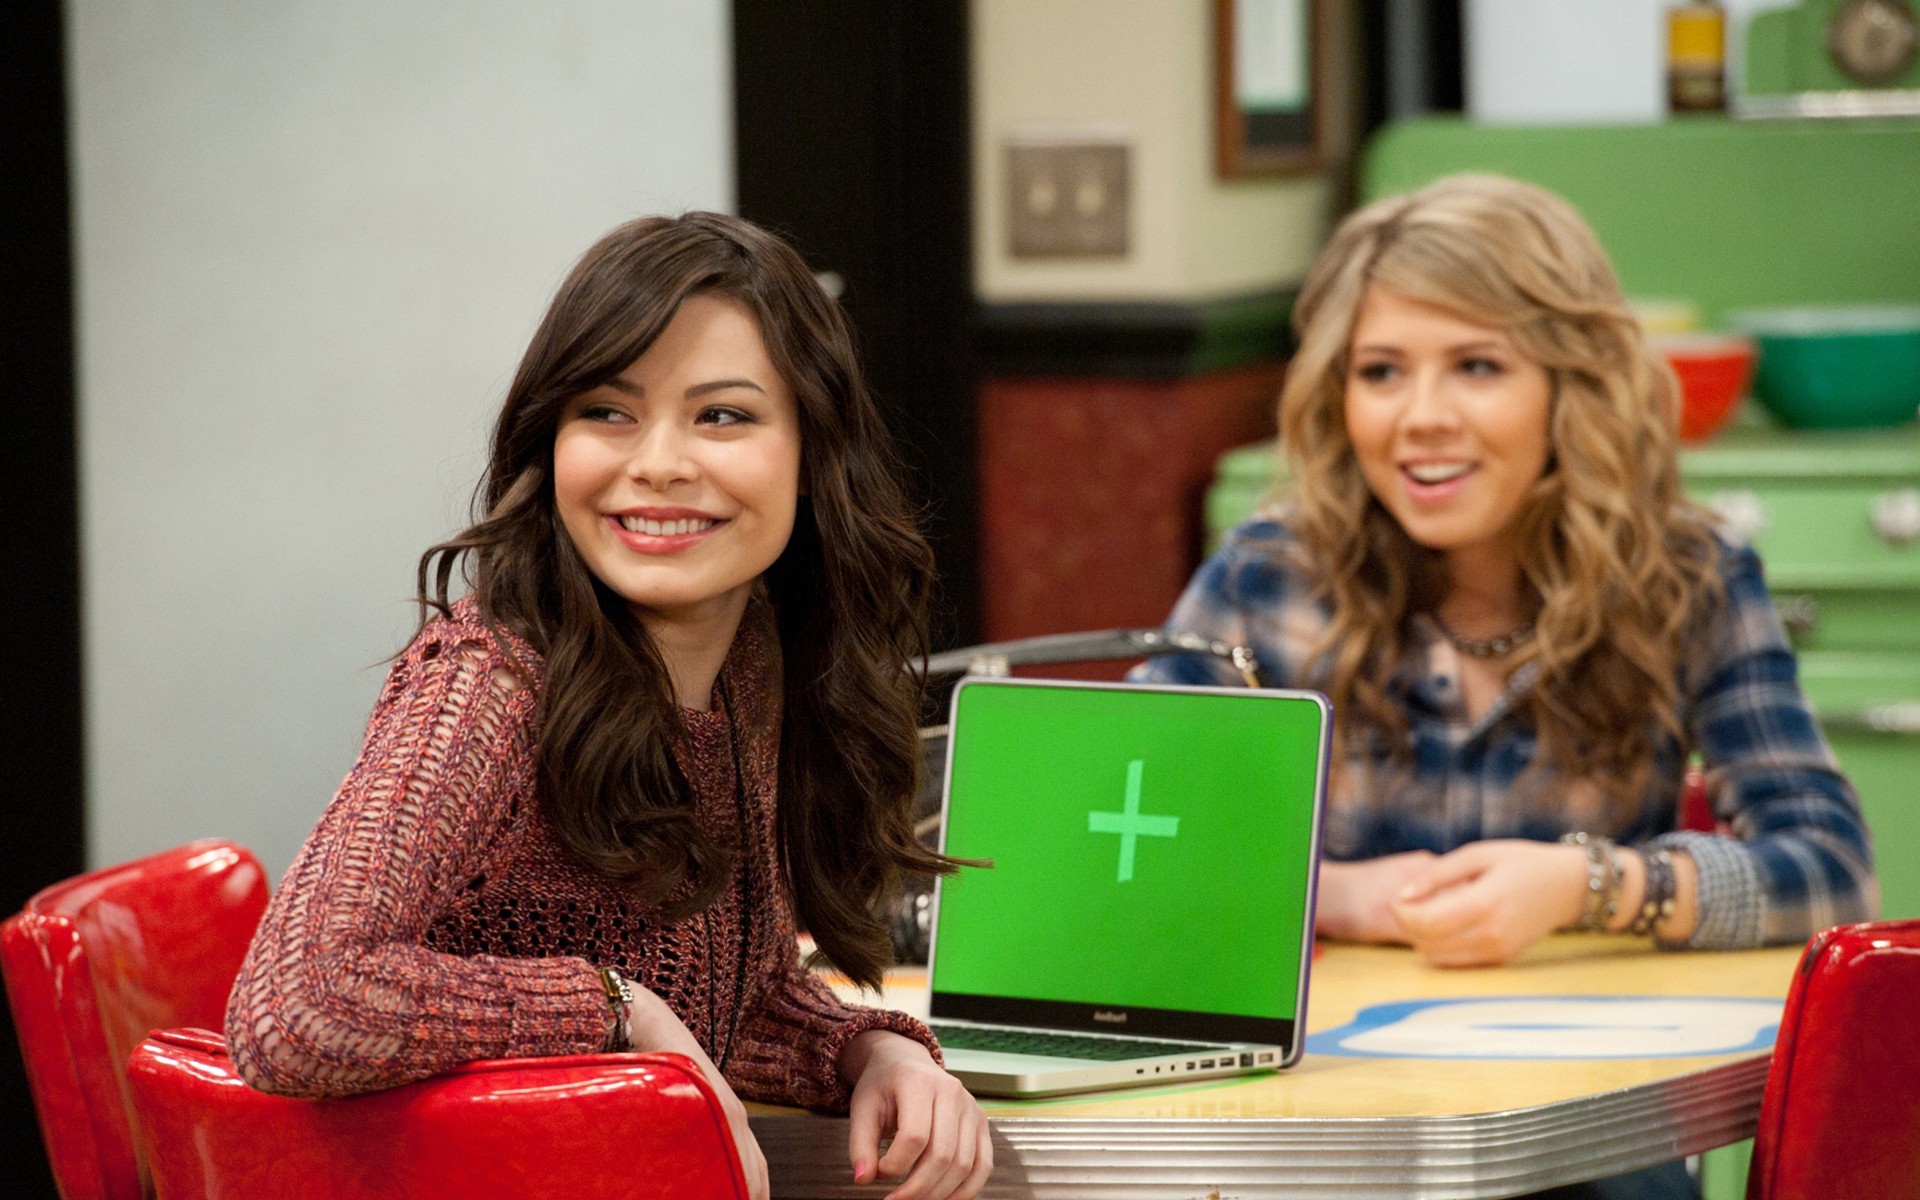 Jennette McCurdy in iCarly